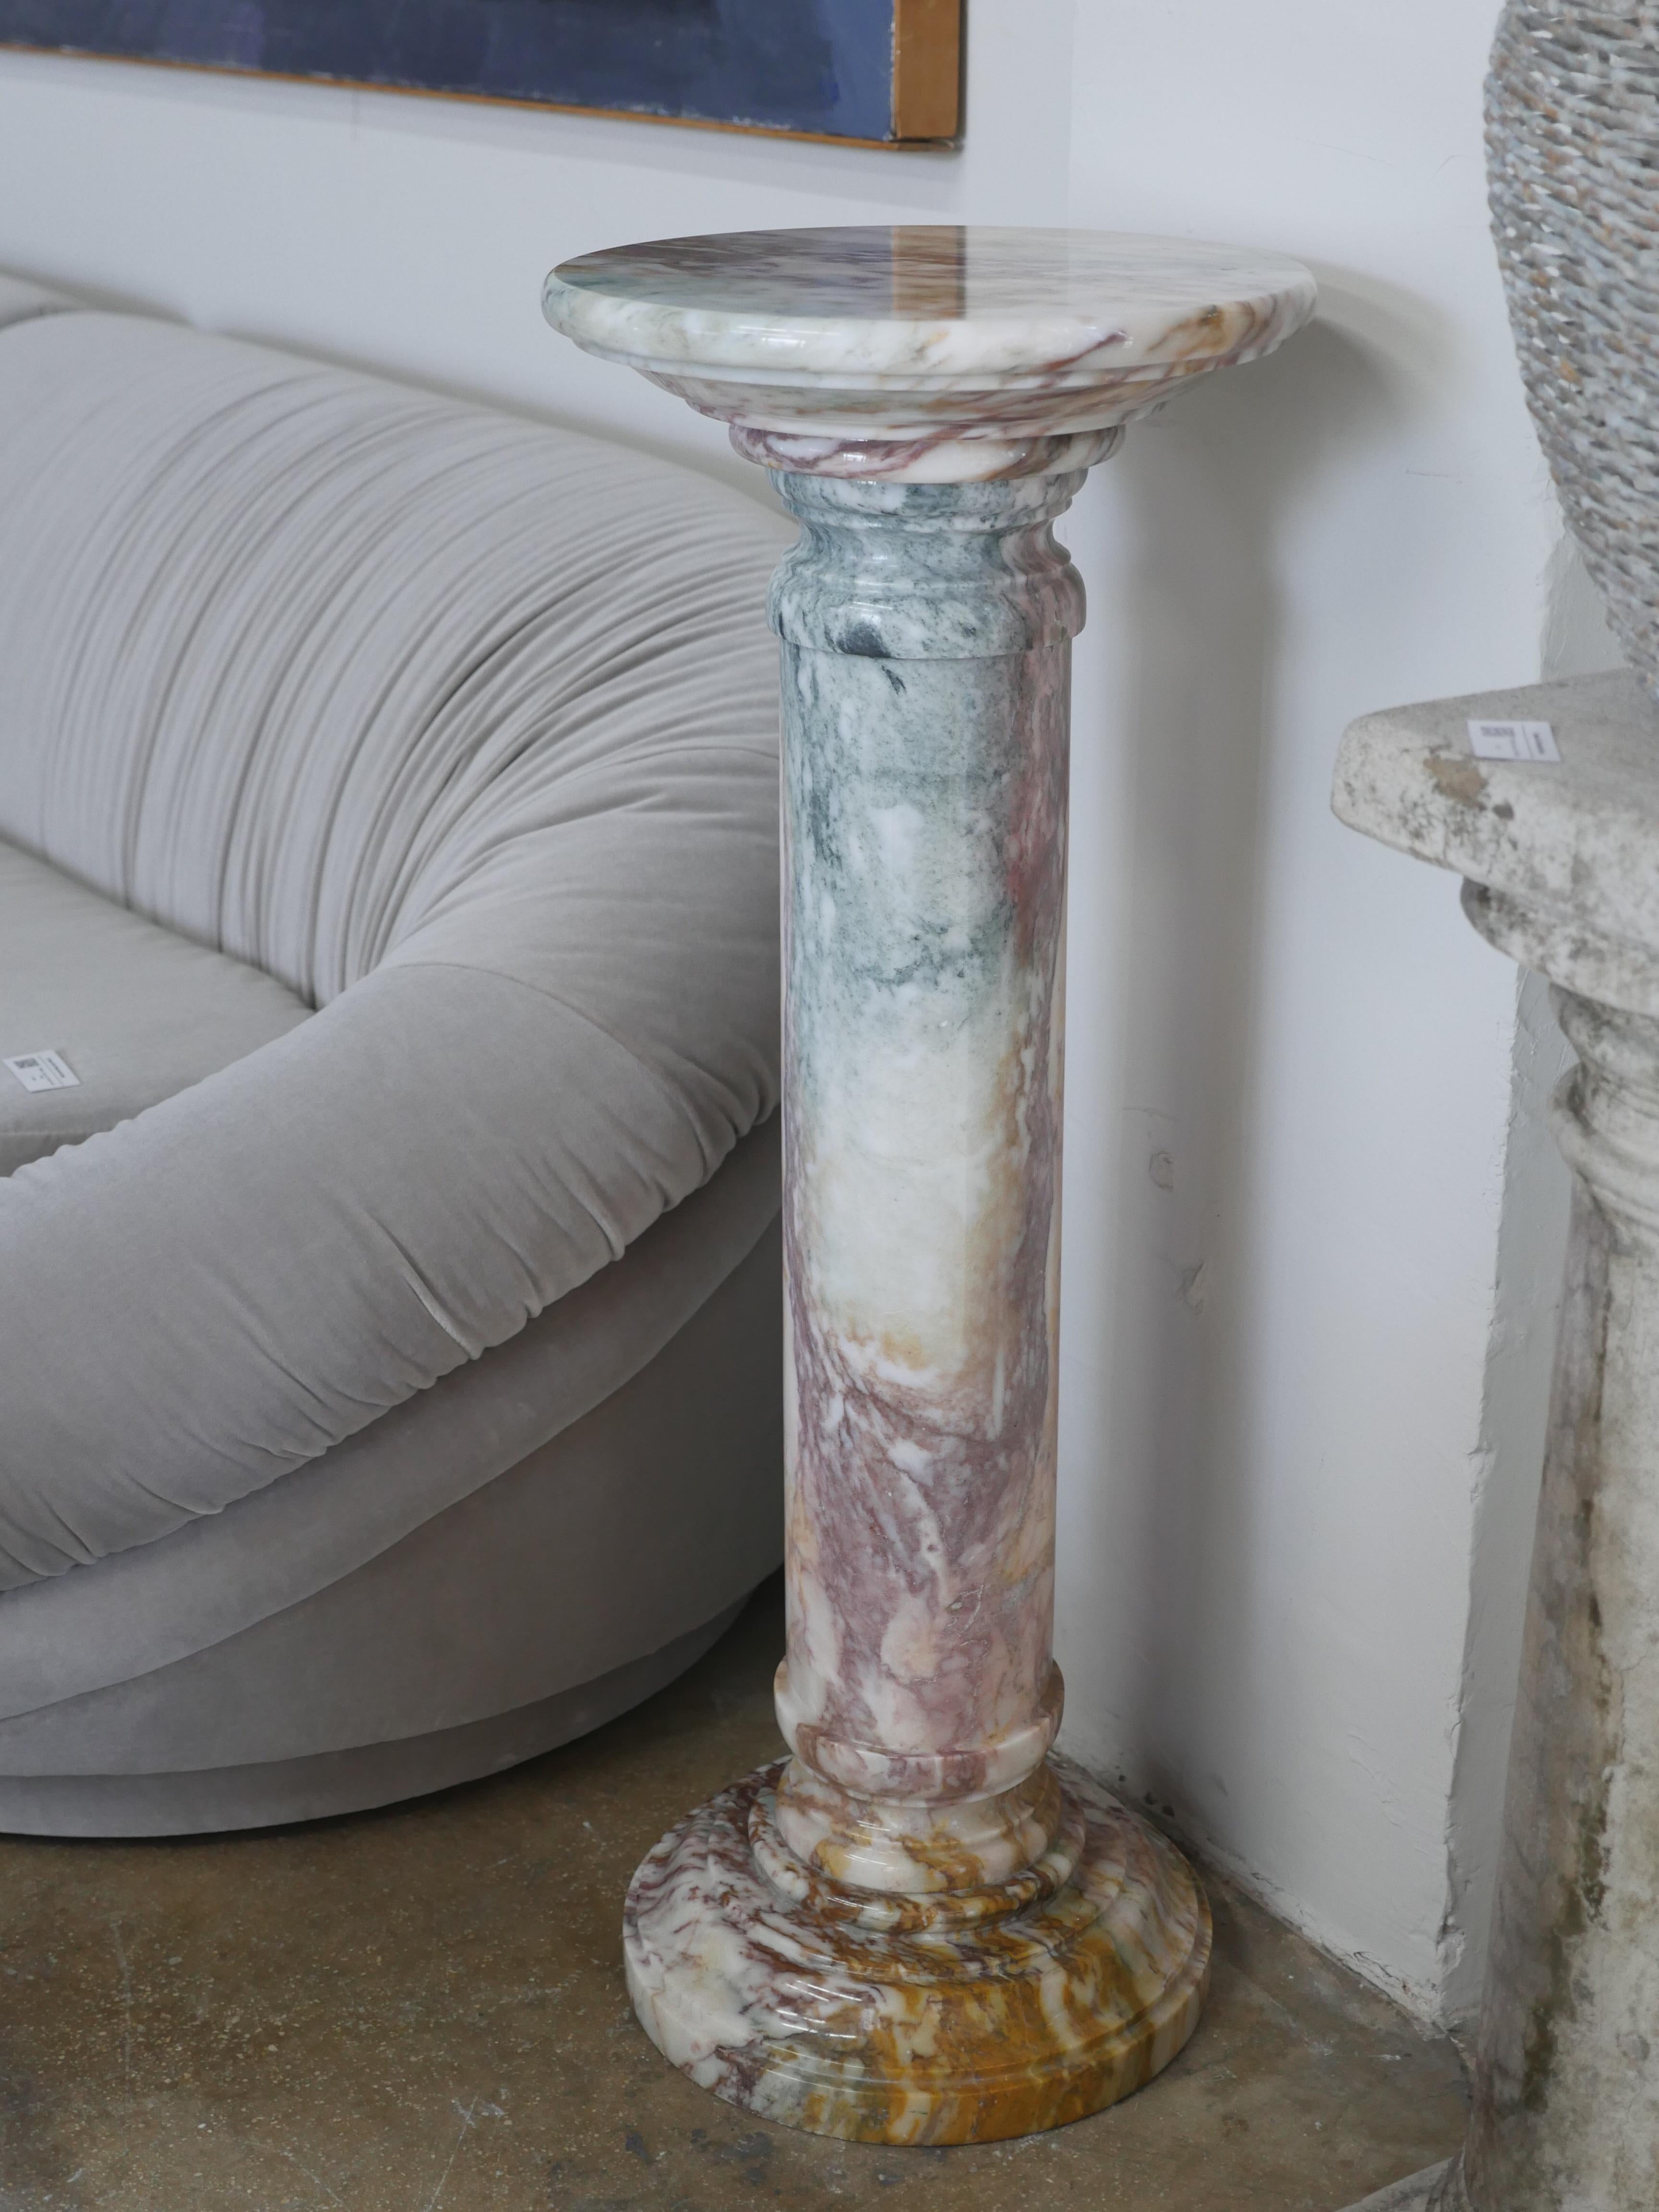 1960s Italian made, Viola Calcutta, polished solid marble pedestal. With it's exotic highly variegated veins this vintage pedestal is perfect for displaying your favorite sculpture, plant and adding a nice touch of character to the room. 

